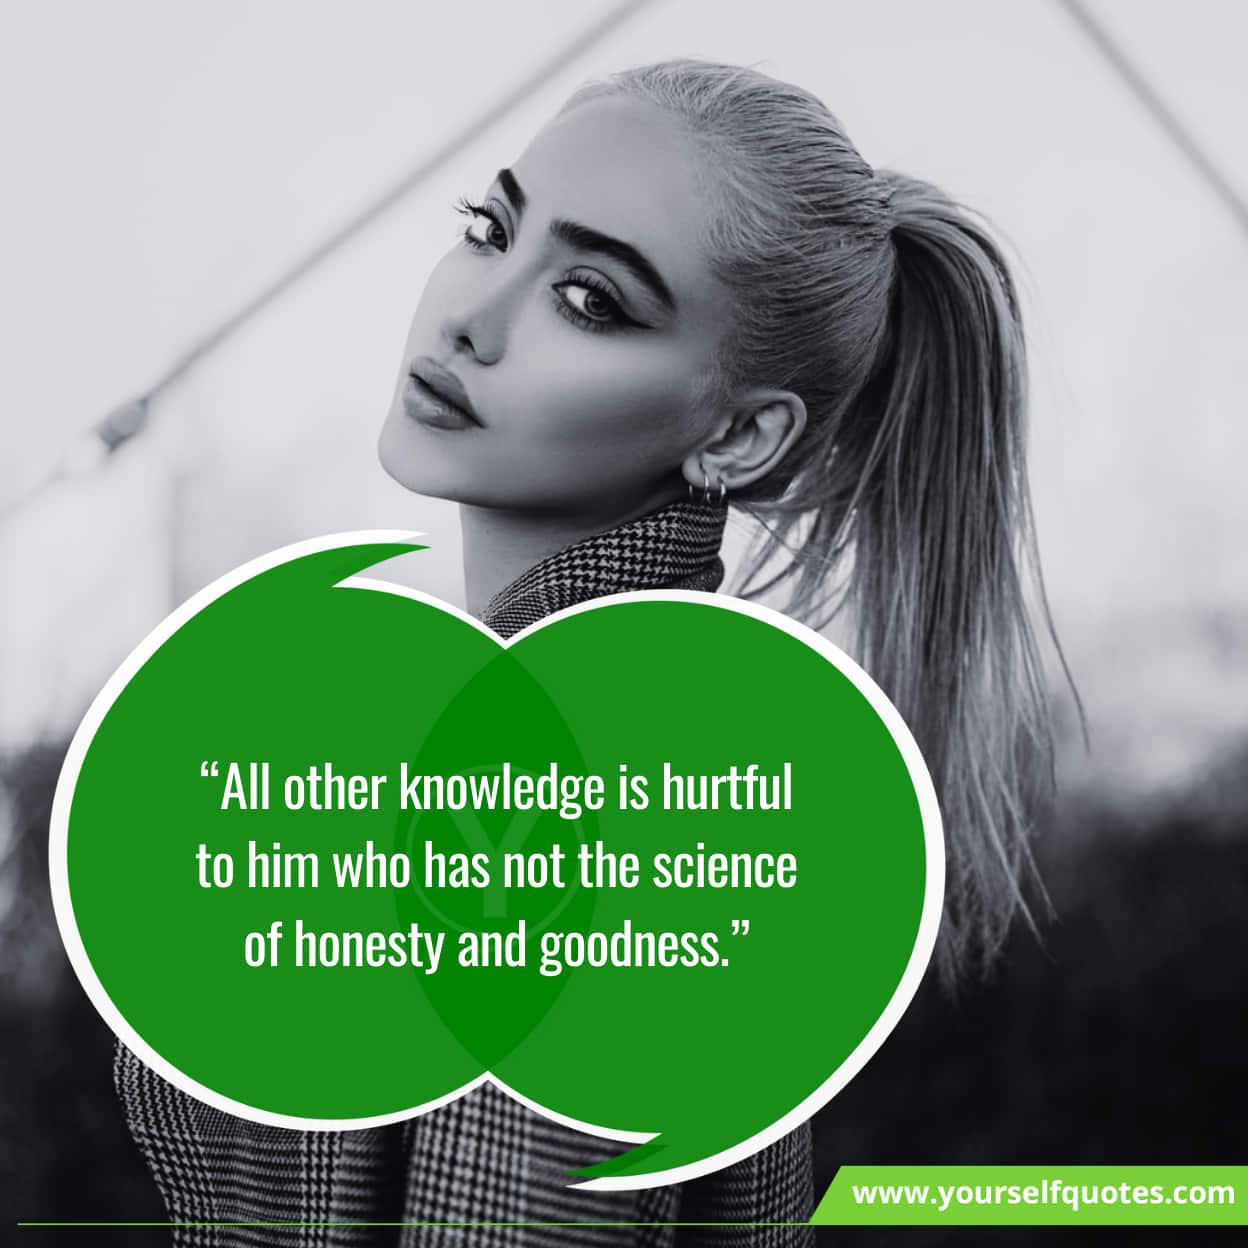 Best Truthful Quotes On Honesty